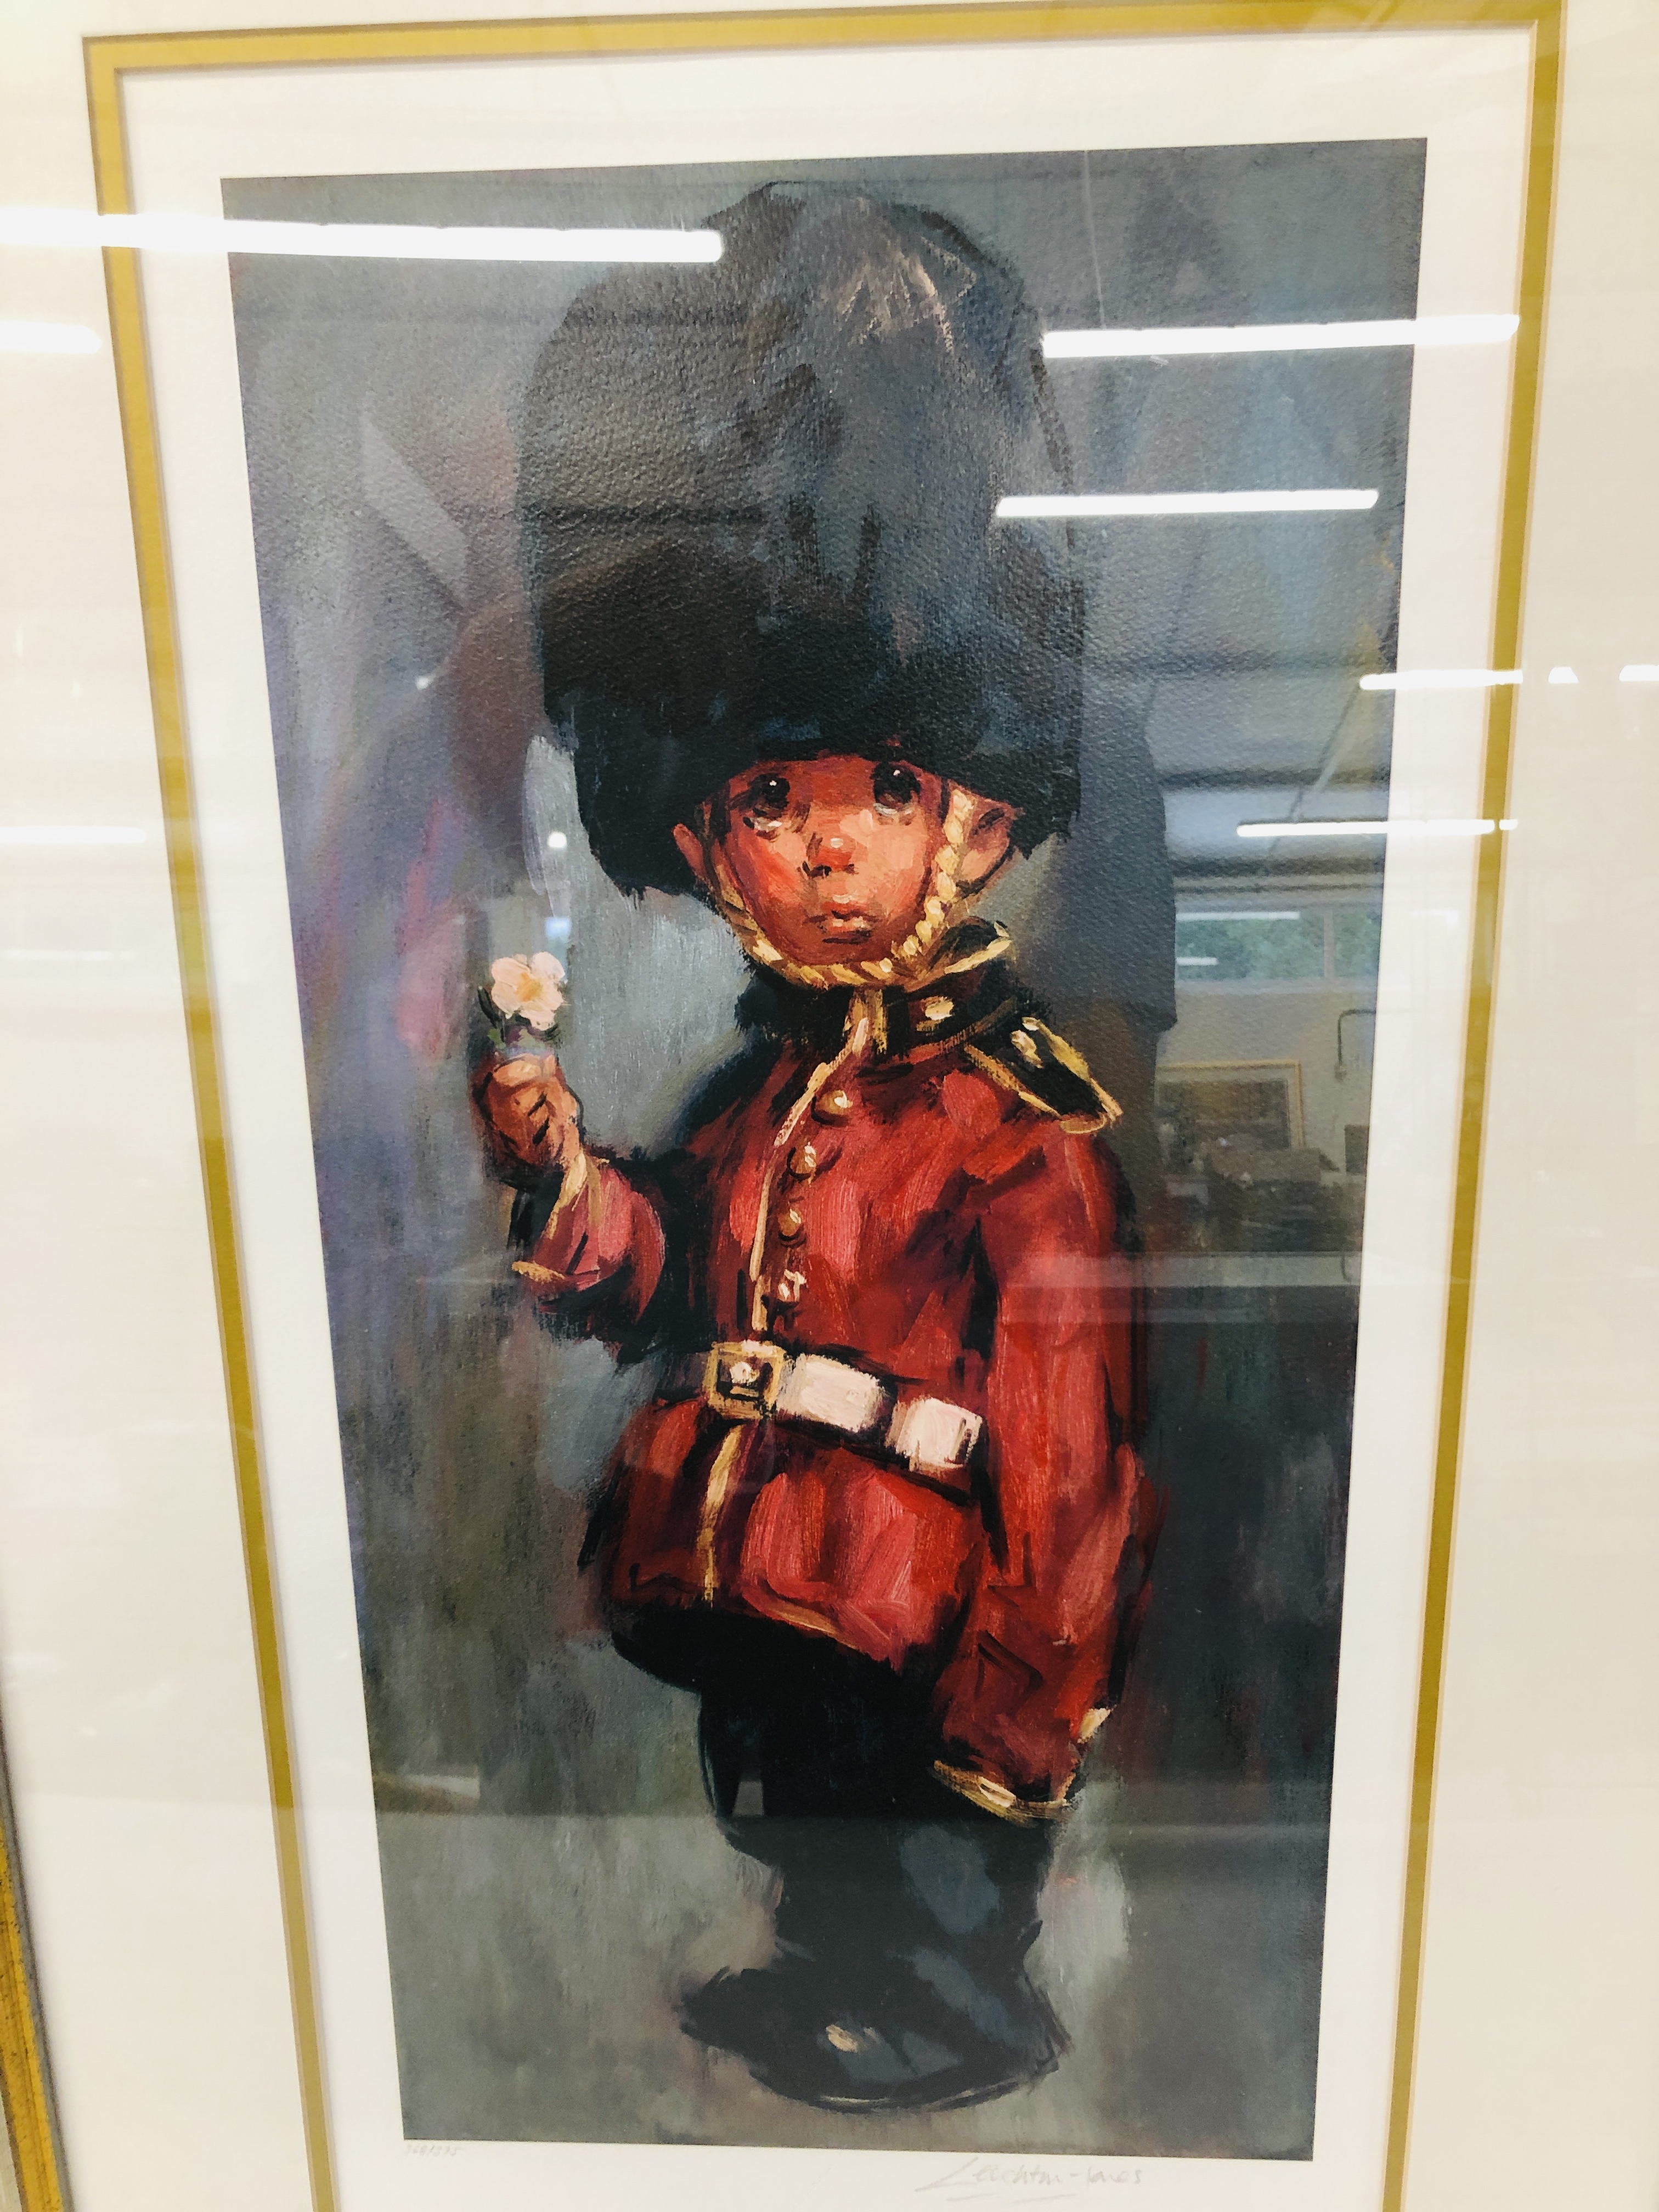 FRAMED LIMITED EDITION 368/375 PRINT "THE QUEENS GUARD" BY BARRY LEIGHTON-JONES ALONG WITH - Image 2 of 6